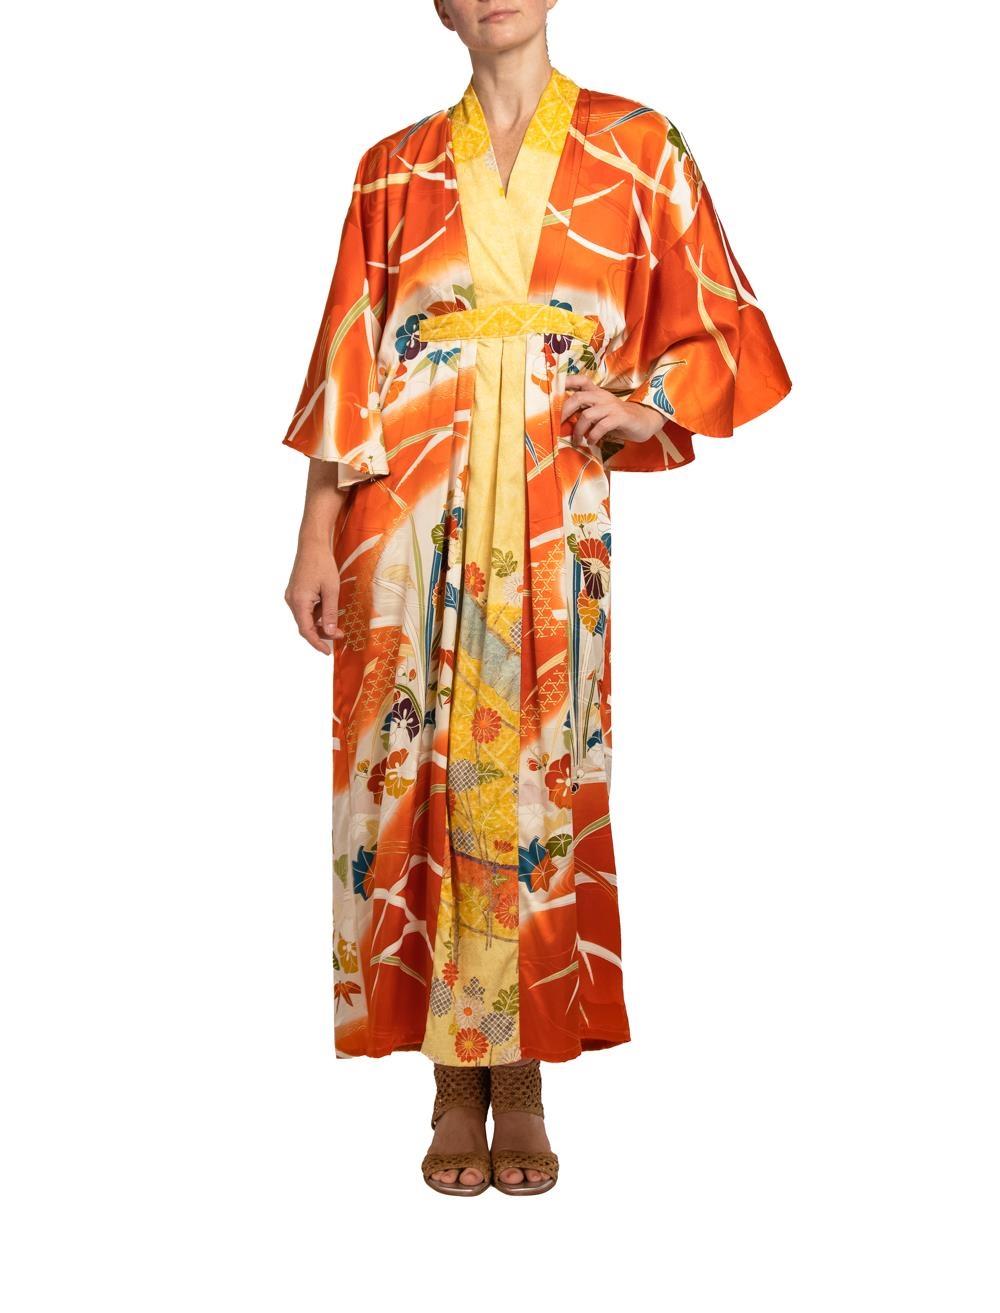 MORPHEW COLLECTION Orange & Yellow Silk Kaftan With Metallic Gold Painted Details
MORPHEW COLLECTION is made entirely by hand in our NYC Ateliér of rare antique materials sourced from around the globe. Our sustainable vintage materials represent